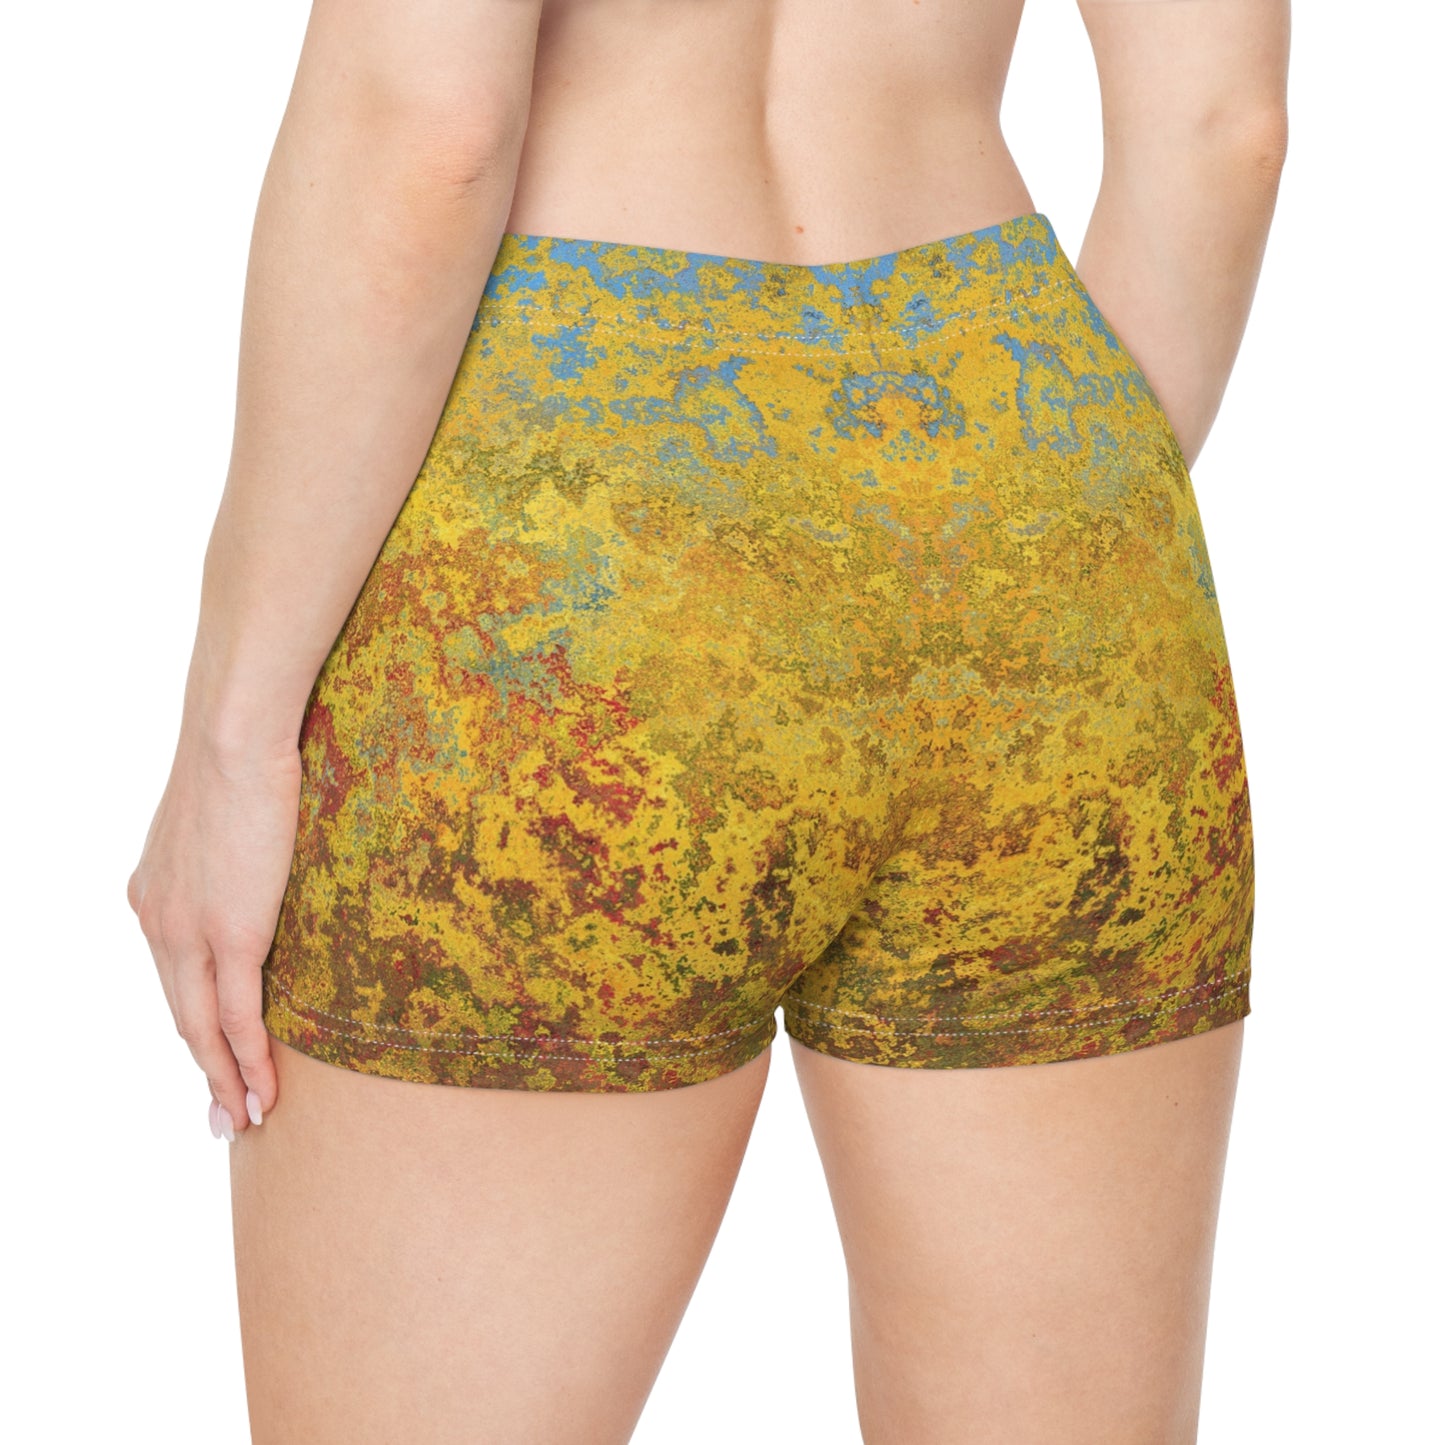 Gold and blue spots - Inovax Women's Shorts